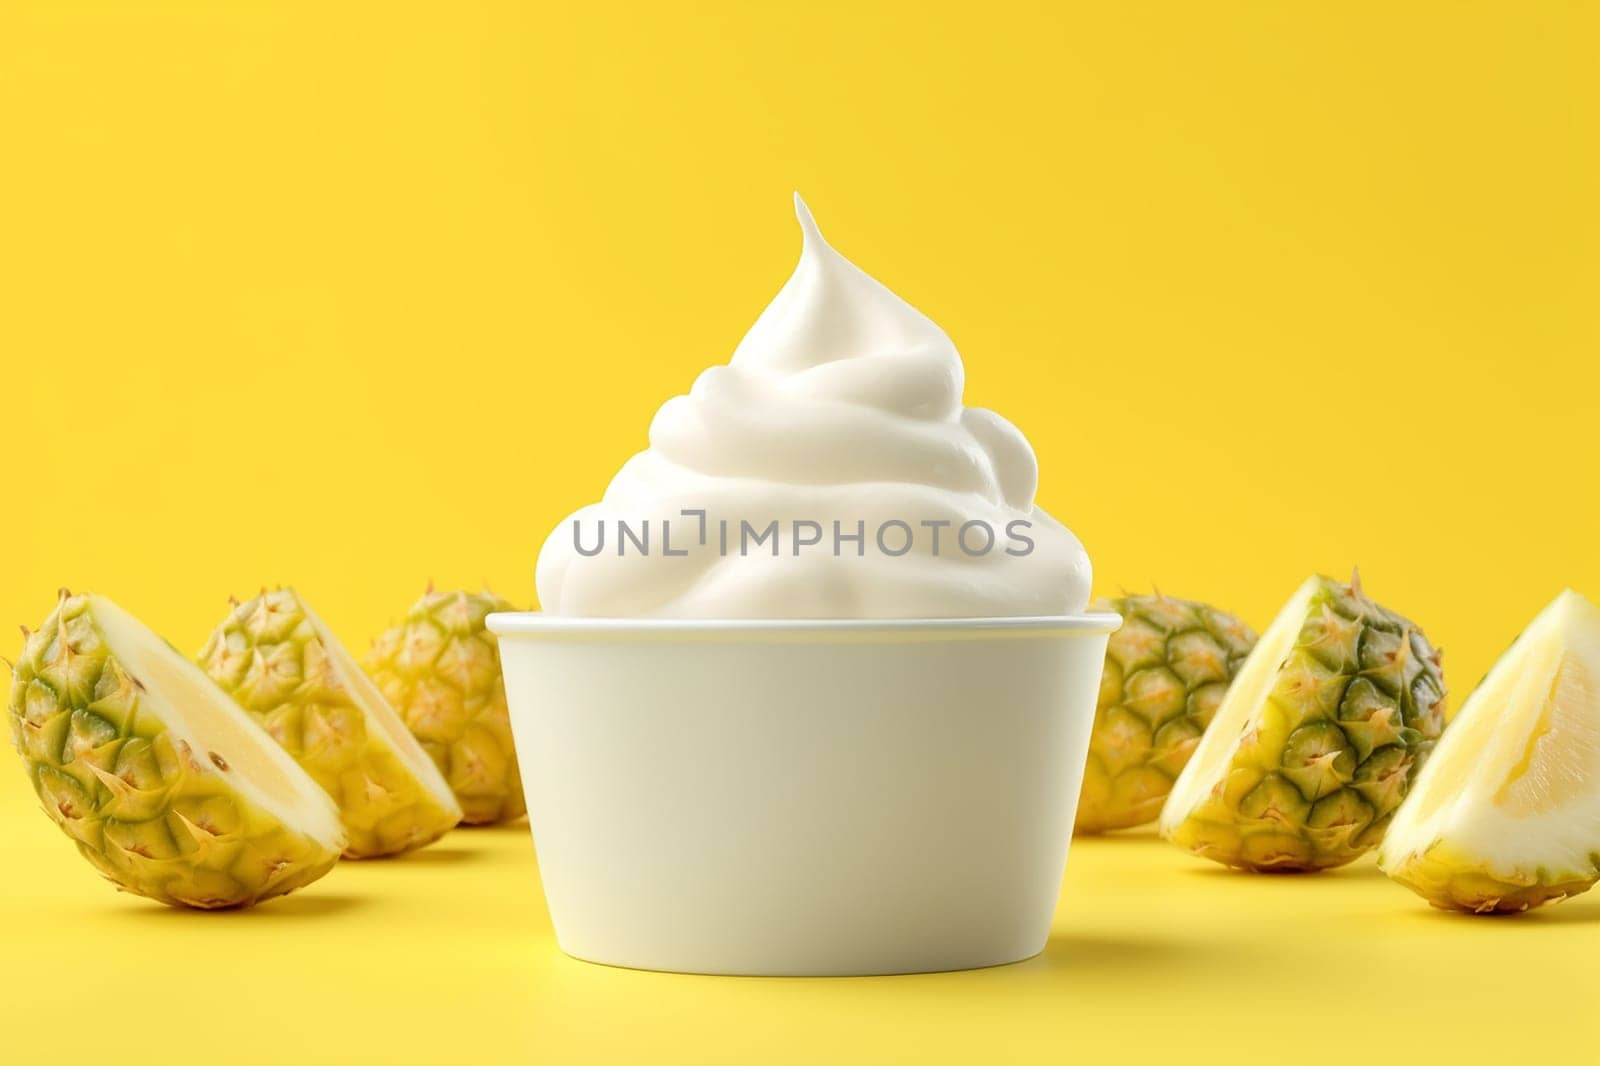 Creamy frozen yogurt with a tangy pineapple flavor. by Hype2art